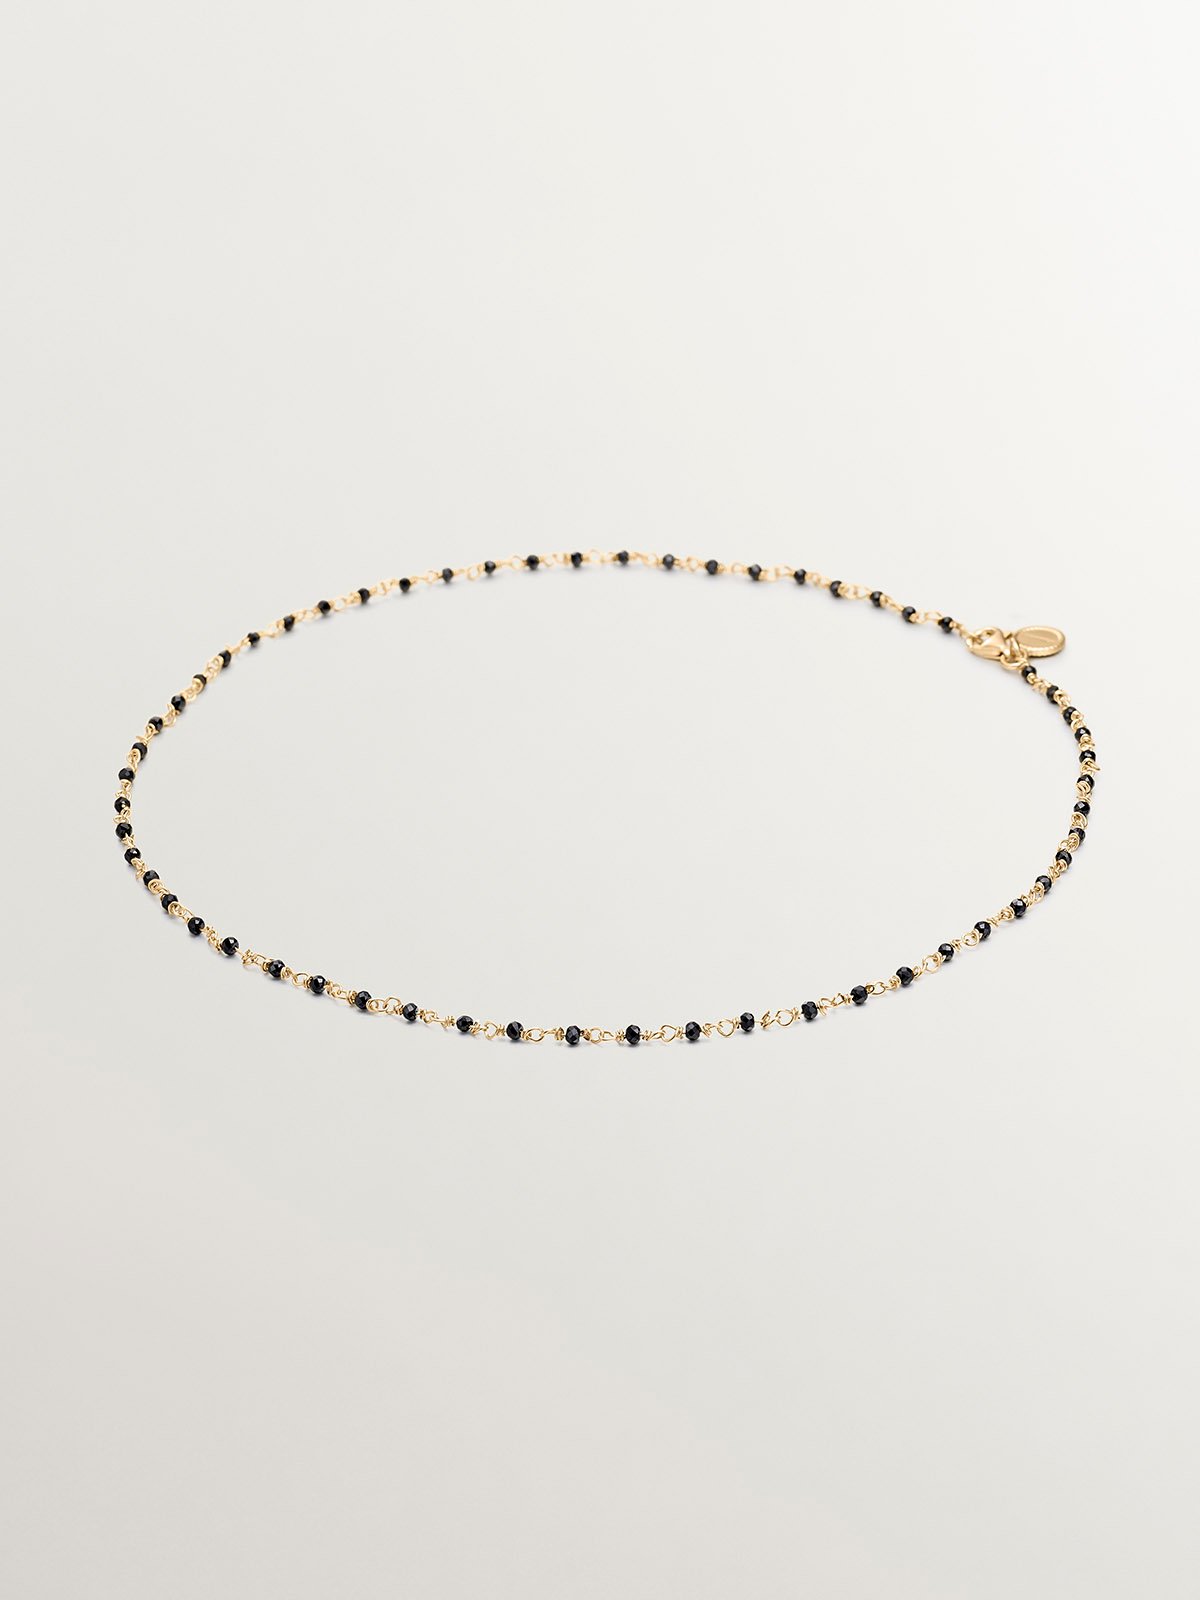 925 Silver chain plated in 18K yellow gold with black spinels.